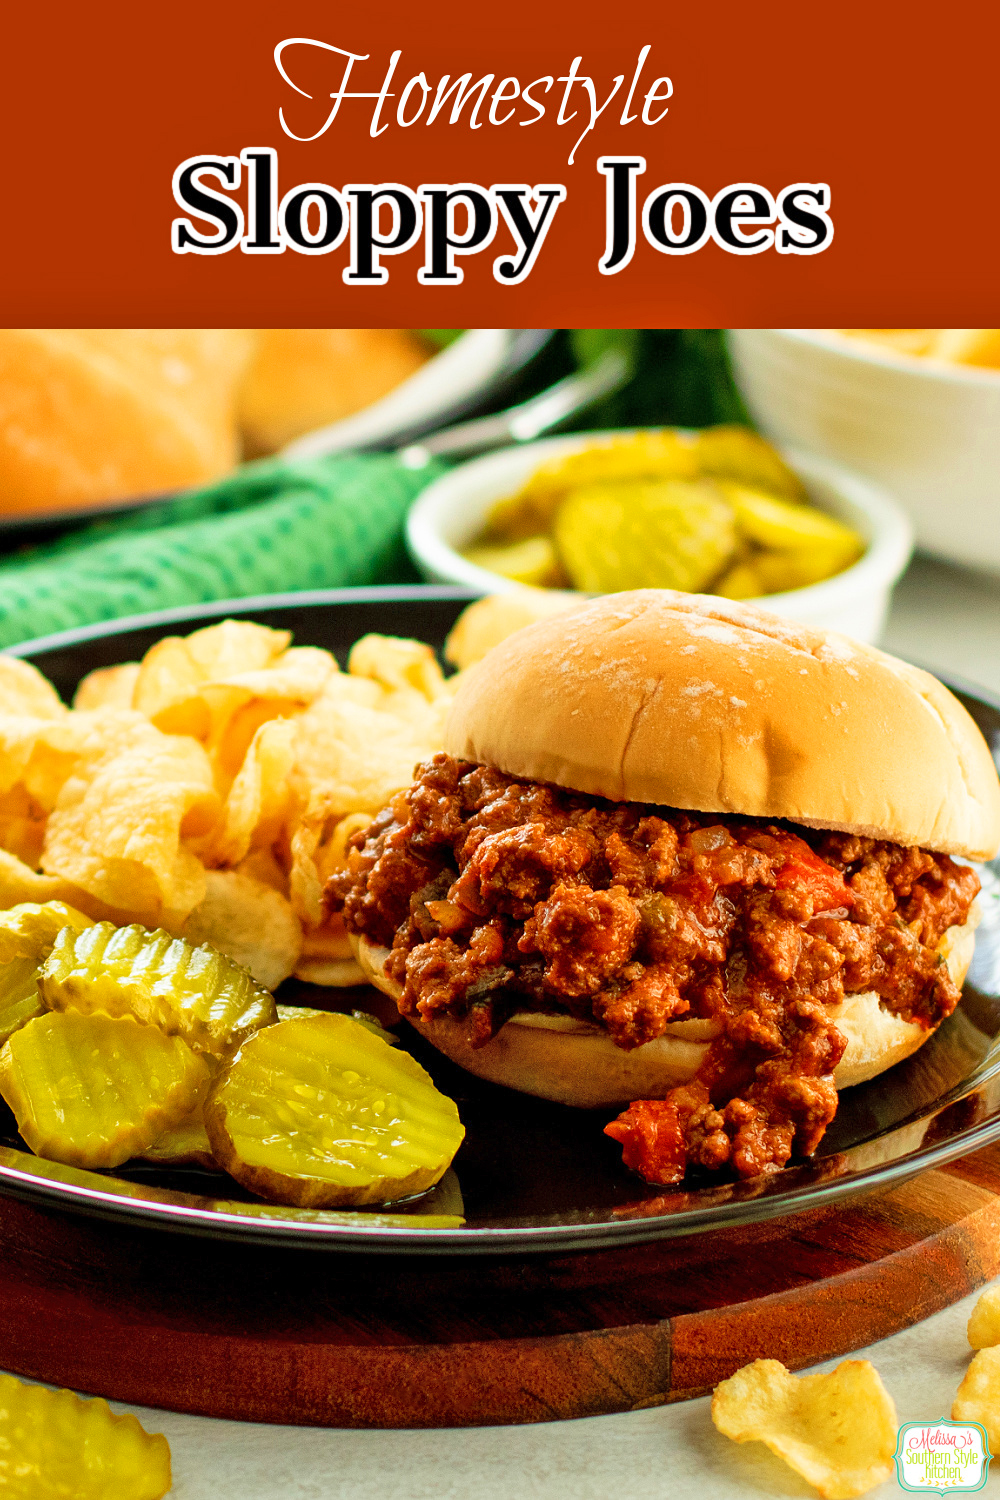 This Sloppy Joes recipe is just what you need for a simple supper after a hectic day. Stuff the rich filling into warm rolls and devour #sloppyjoes #easygroundbeefrecipes #smokyjoes #easysloppyjoes #homemadesloppyjoes via @melissasssk